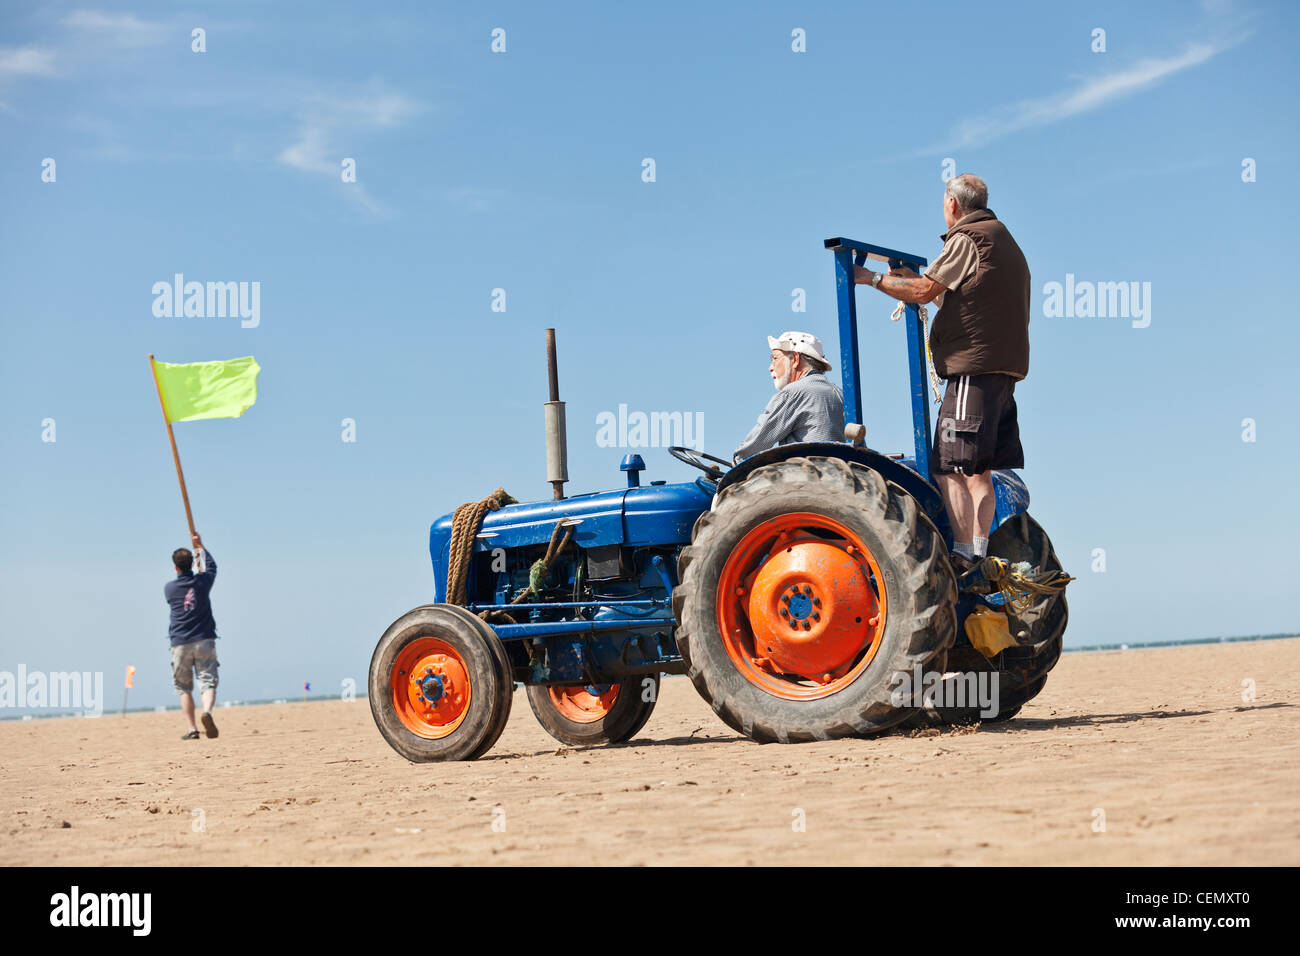 land yacht sailing race officials ride a tractor on the beach with flags preparing for a race Stock Photo